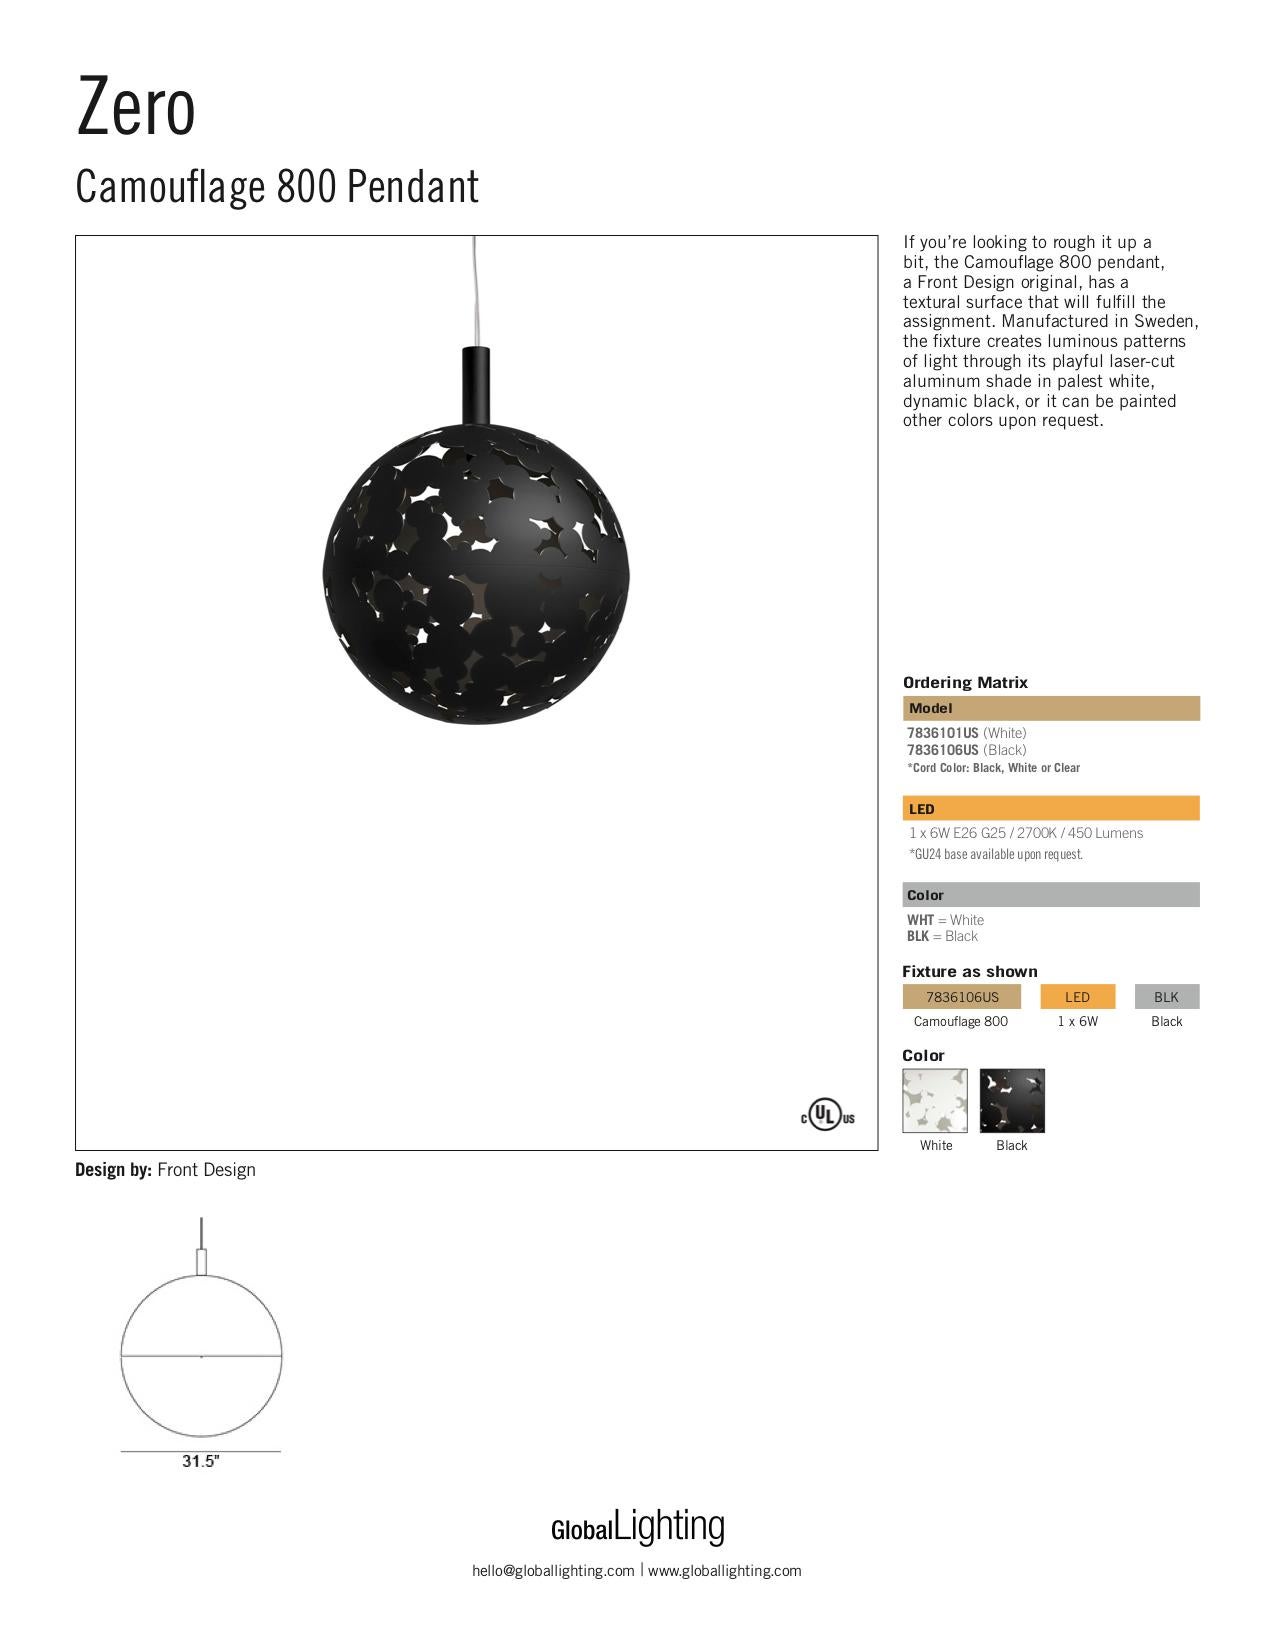 Contemporary Zero Camouflage 800 Pendant in Black by Front Design For Sale